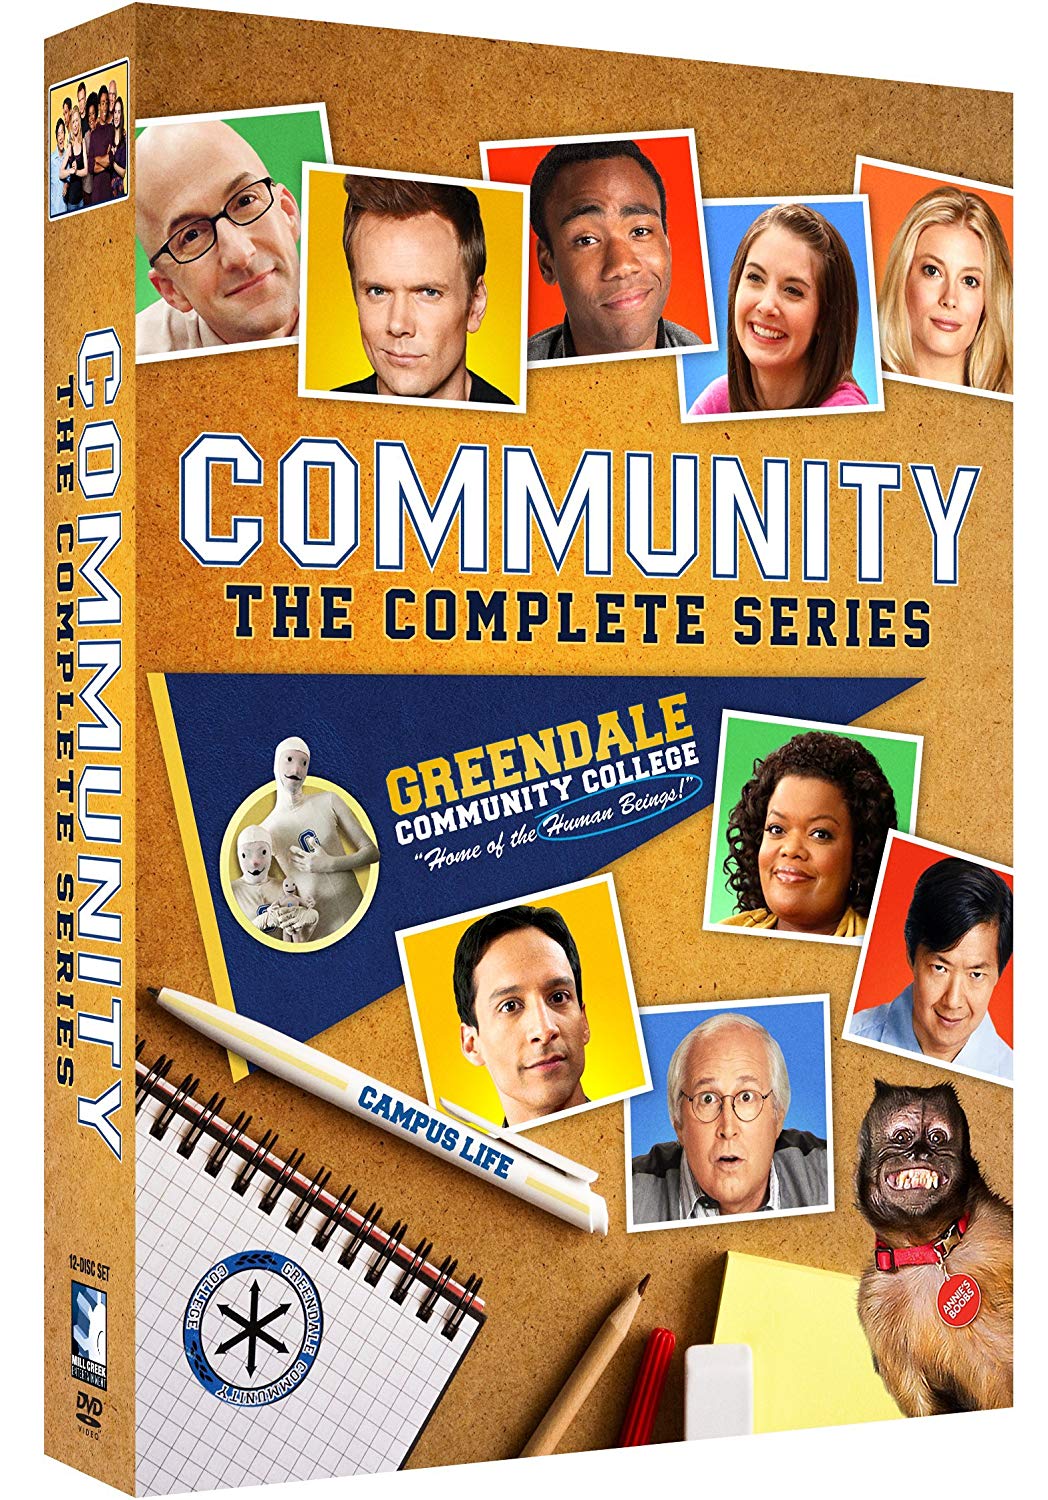 Community: The Complete Series - DVD [ 2018 ]  - Comedy Television On DVD - TV Shows On GRUV